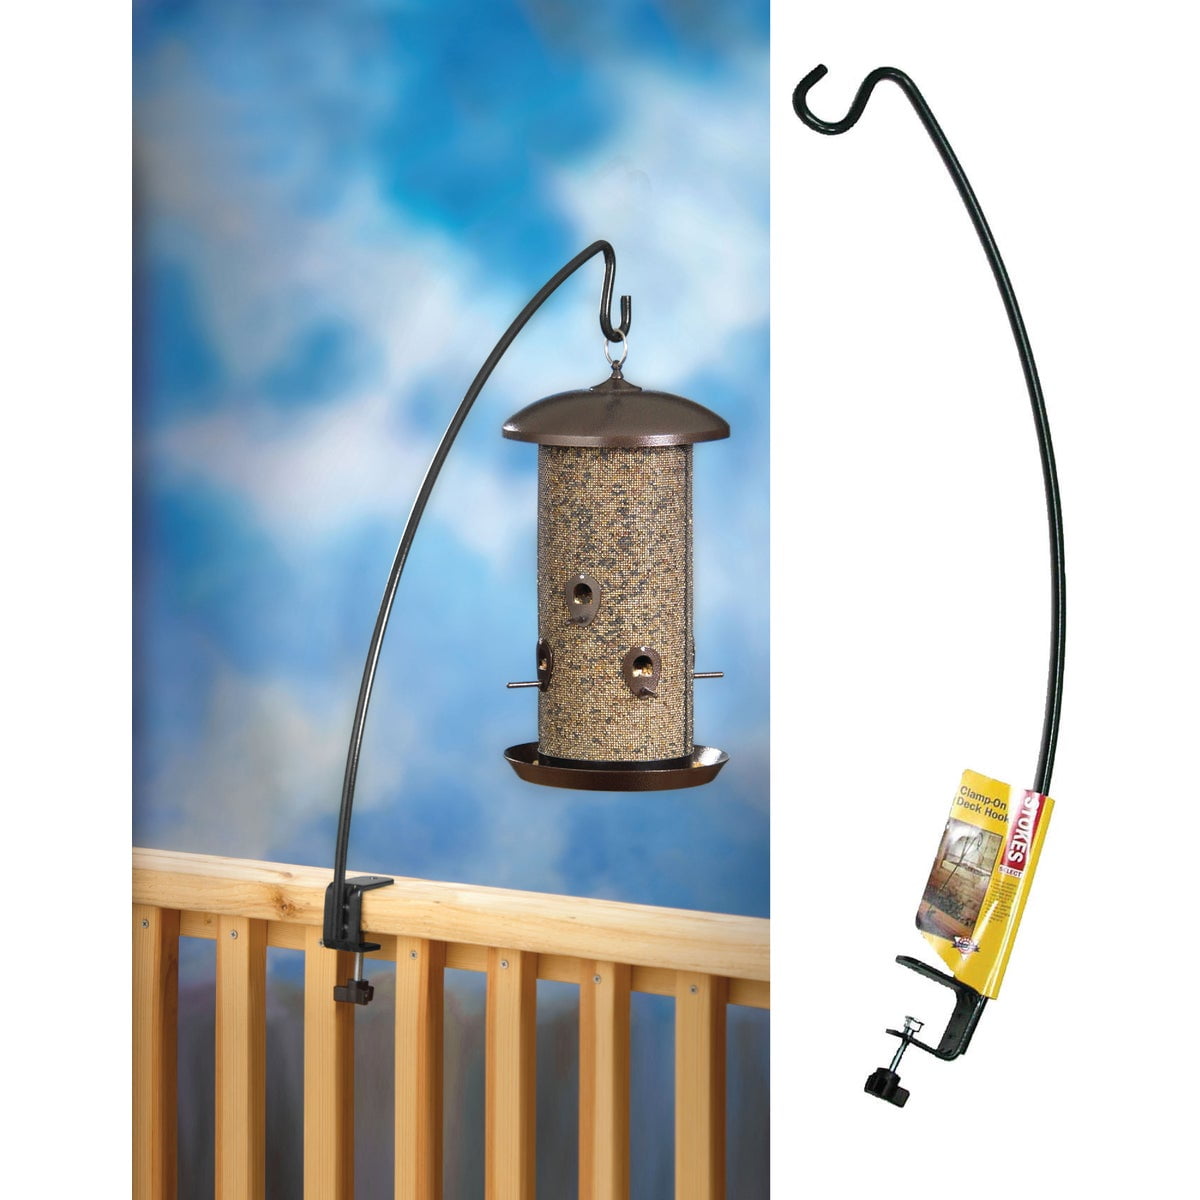 Stokes Select 27-Inch Metal Extended Reach Deck Hook with 360 Degree Swing for Bird Feeders